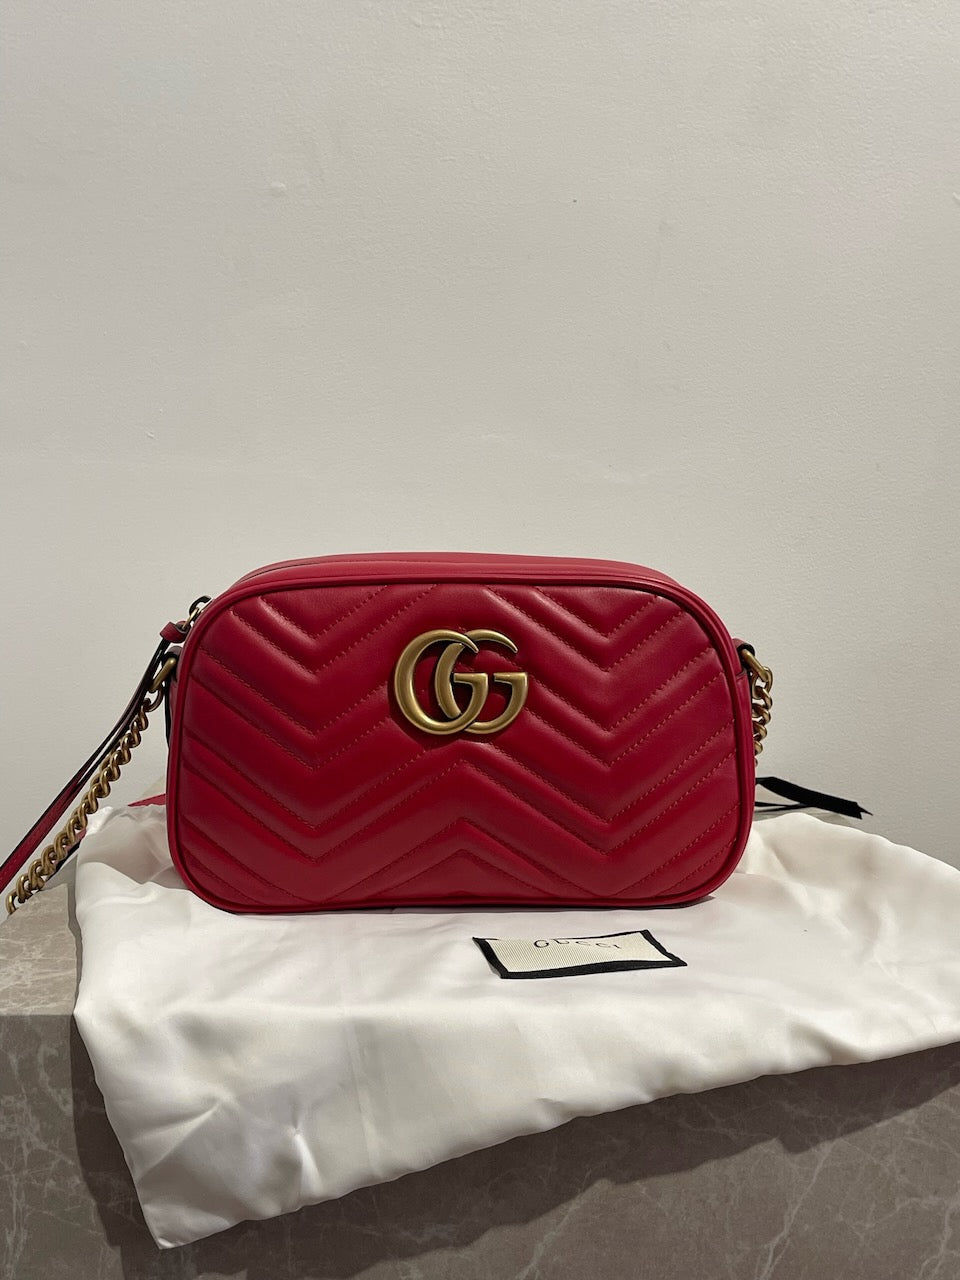 Sac Gucci Marmont rouge NEUF